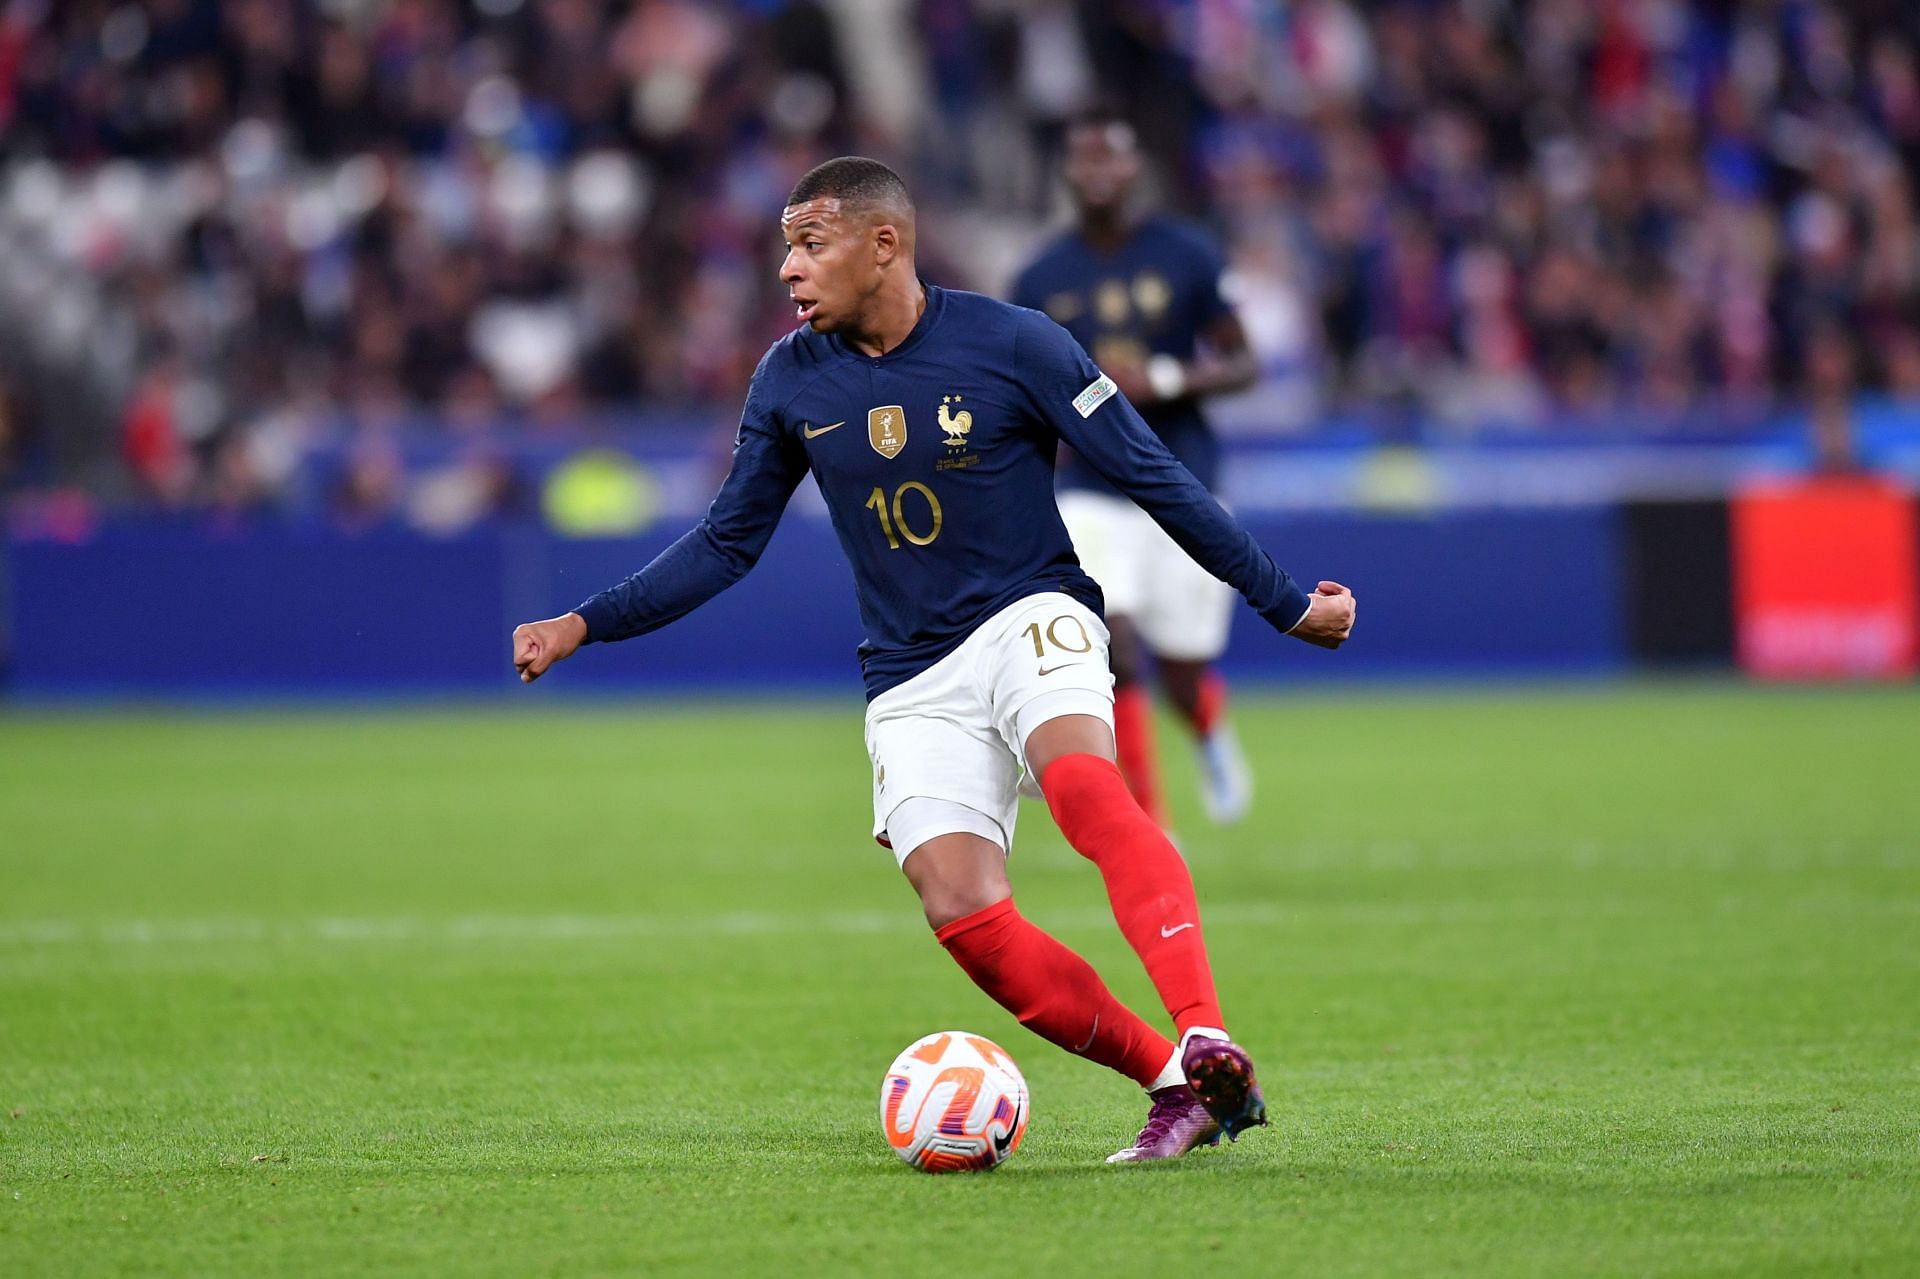 Kylian Mbappe turned down a move to Real Madrid this summer.